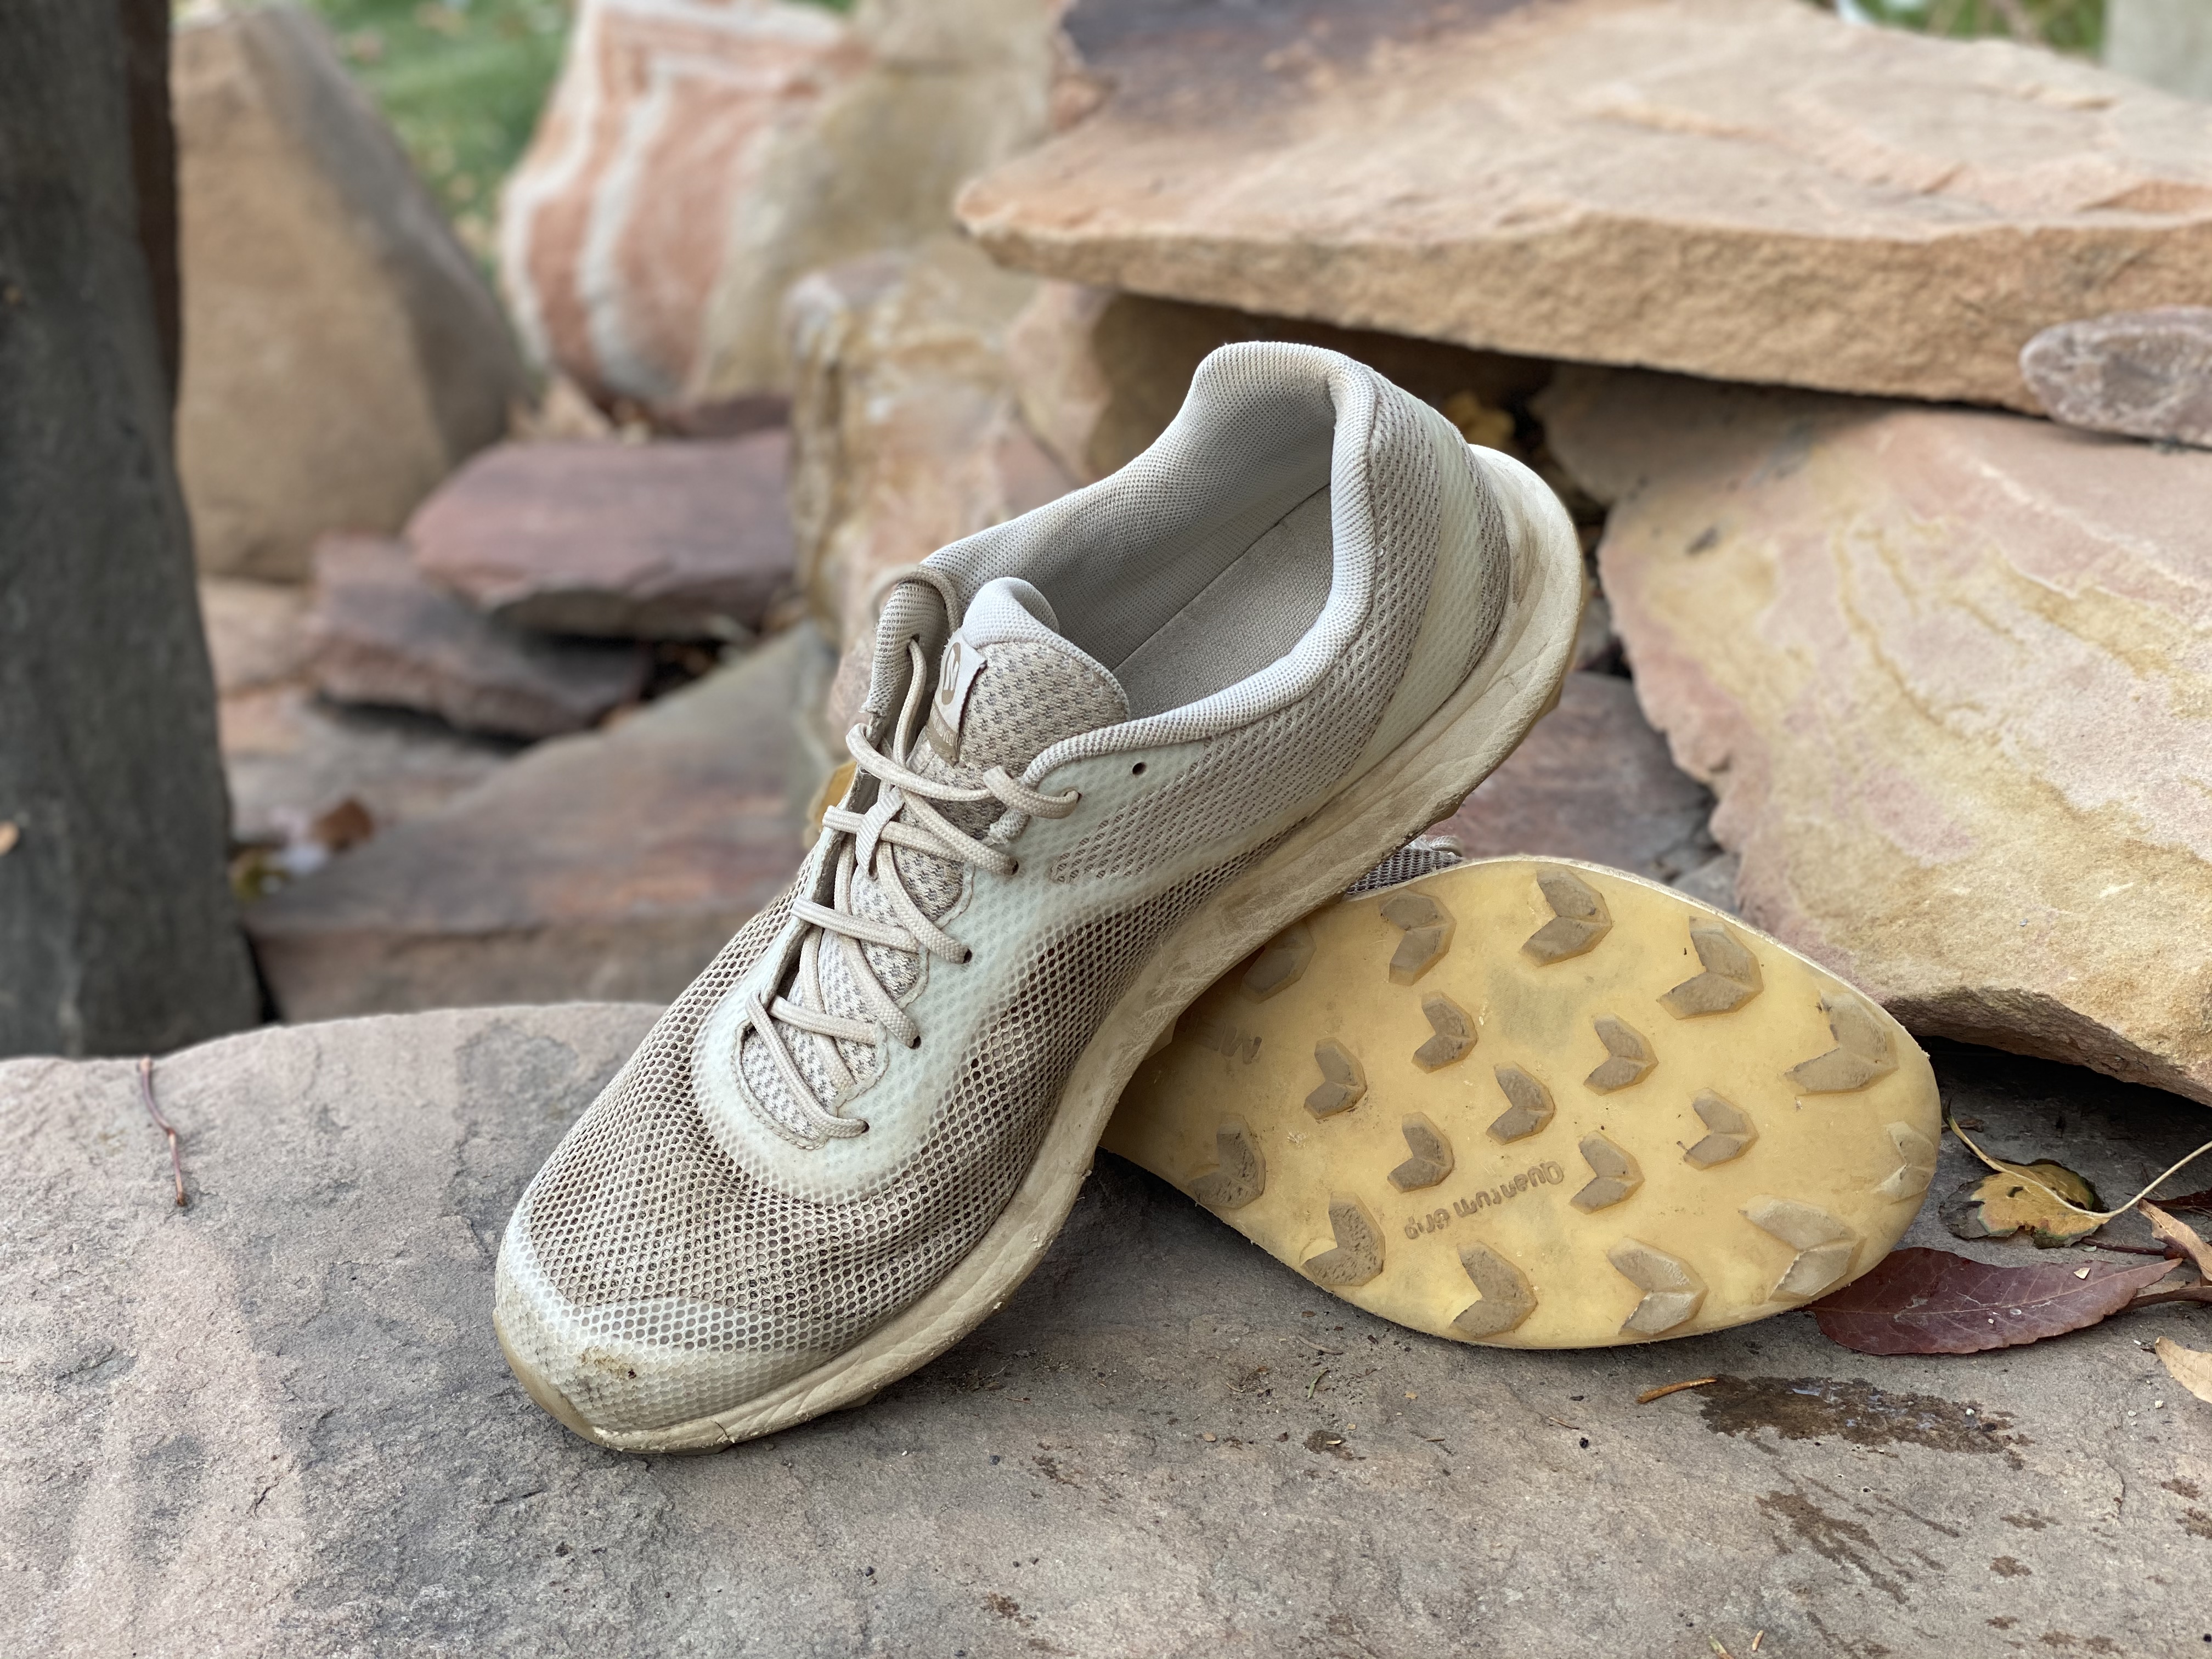 MTL Skyfire Undyed Shoe - Trail And Ultra RunningTrail And Ultra Running